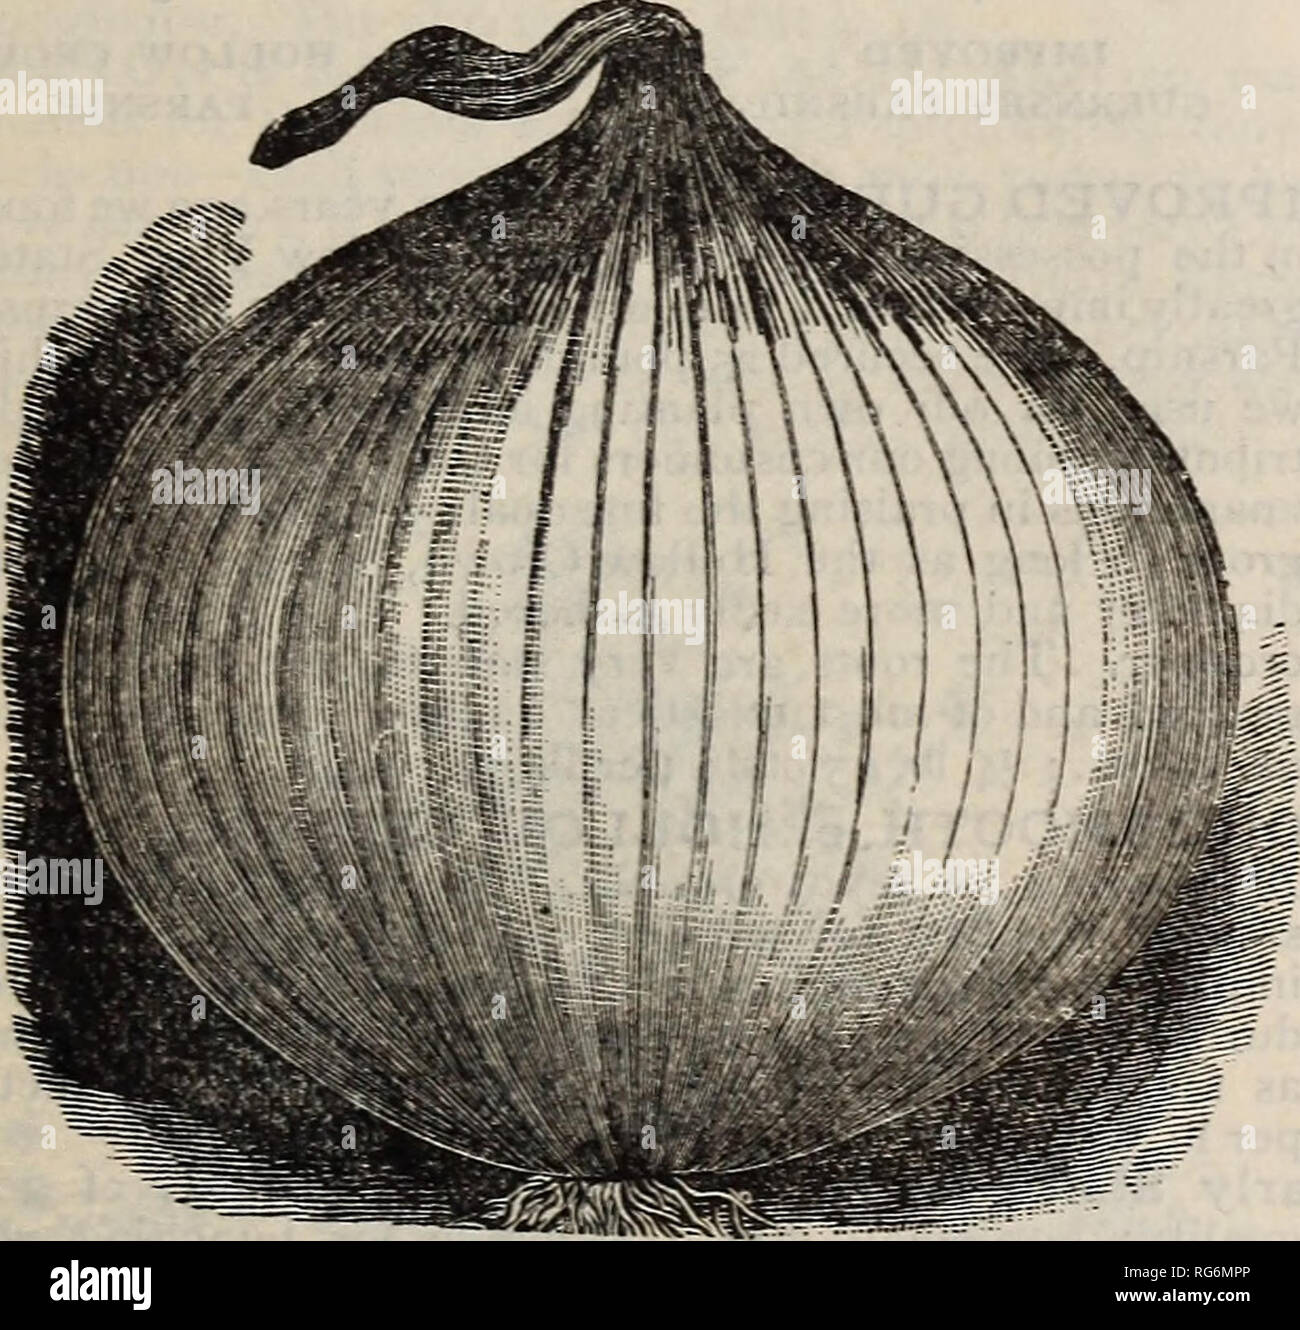 . Burpee's farm annual : garden, farm, and flower seeds. Nursery stock Pennsylvania Philadelphia Catalogs; Flowers Pennsylvania Catalogs; Vegetables Pennsylvania Catalogs; Seeds Pennsylvania Catalogs. WHITE ETNA, OR EXTRA EARLY PEARL ONION. SILVER WHITE ETNA, or EXTRA EARLY PEARL. This beautiful new early Italian Onion is described by the originators as follows :—&quot;We consider it one of the best varieties, and esteem it higher than all other onions cf the same section. It is a little later than the Marzajole, and does not grow quite so large, but its keeping qualities and fine, mild flavor Stock Photo